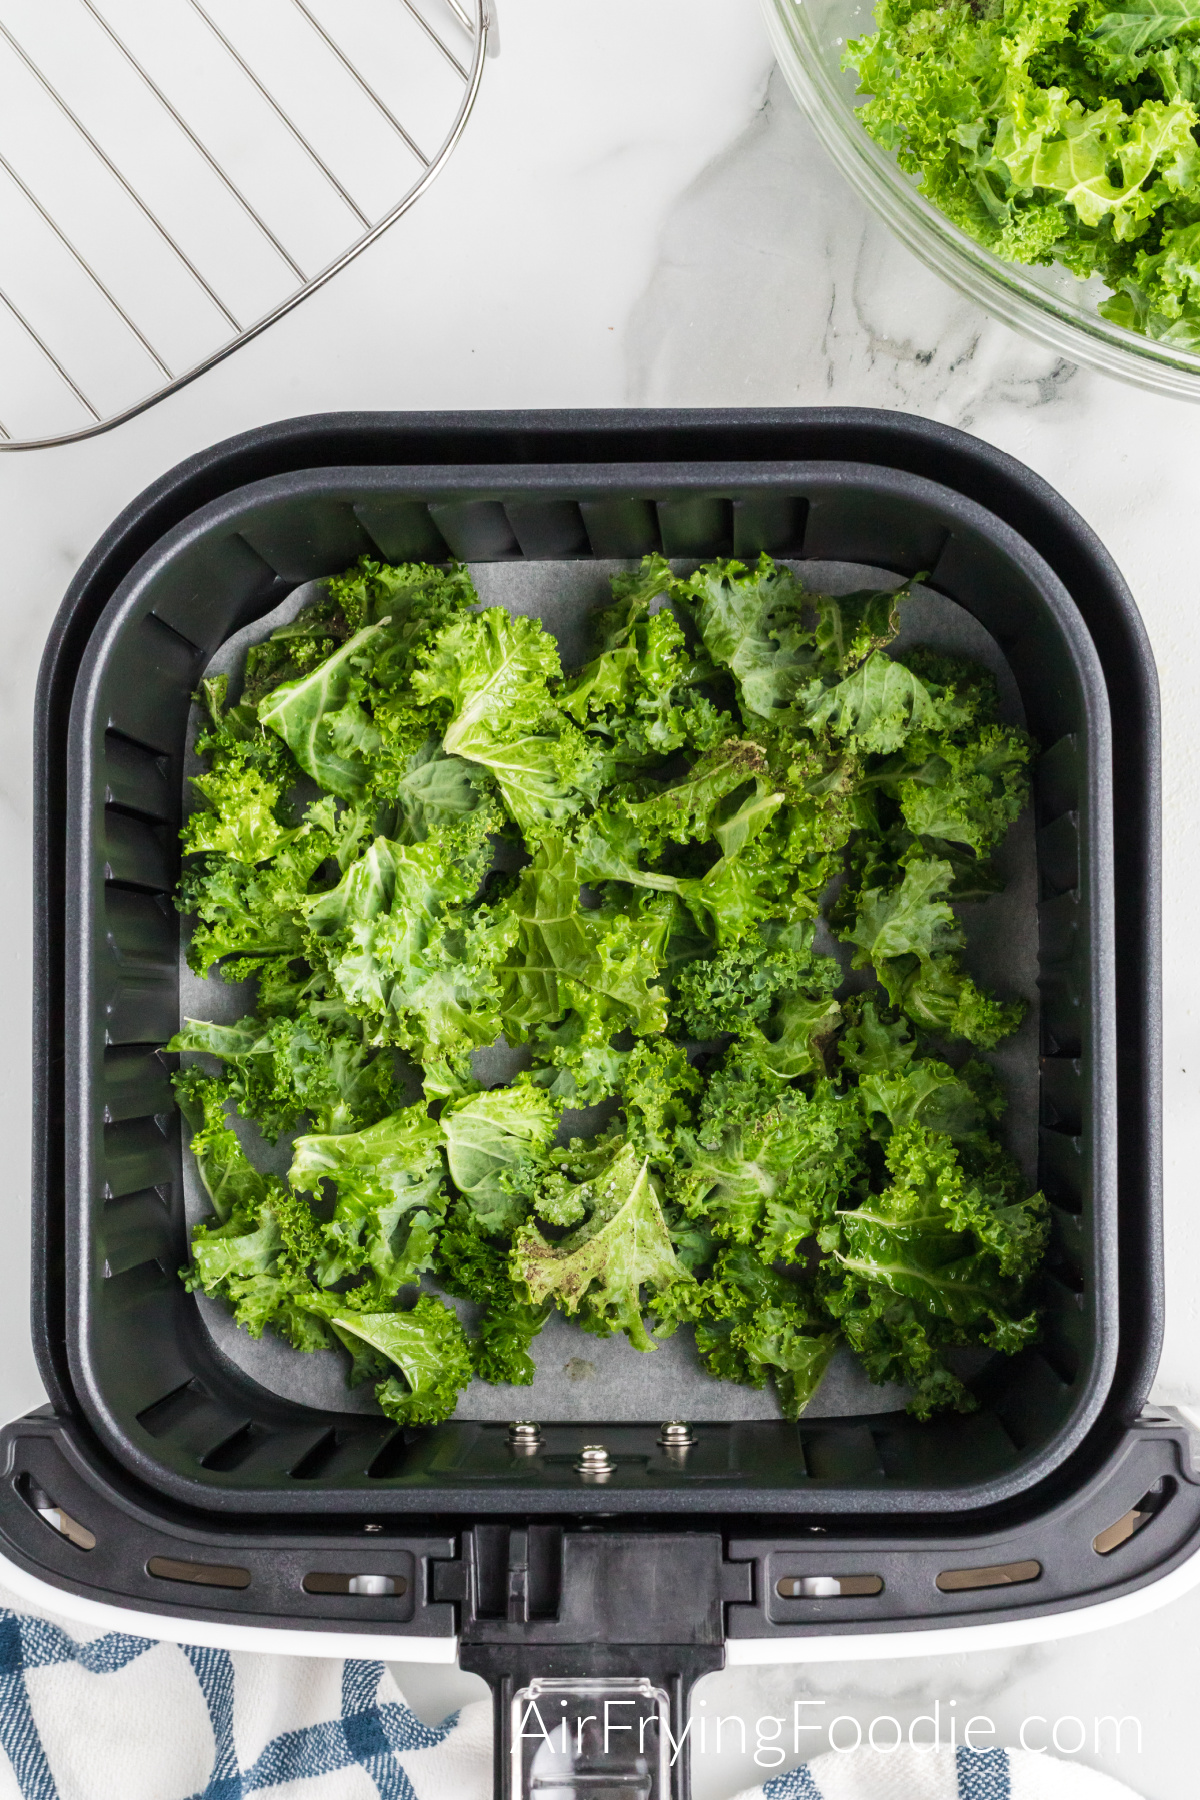 Seasoned kale that has been transferred to the air fryer basket and is ready to cook. The top right of the picture has a glass bowl with more kale leaves and a wire rack in the top right of the image.